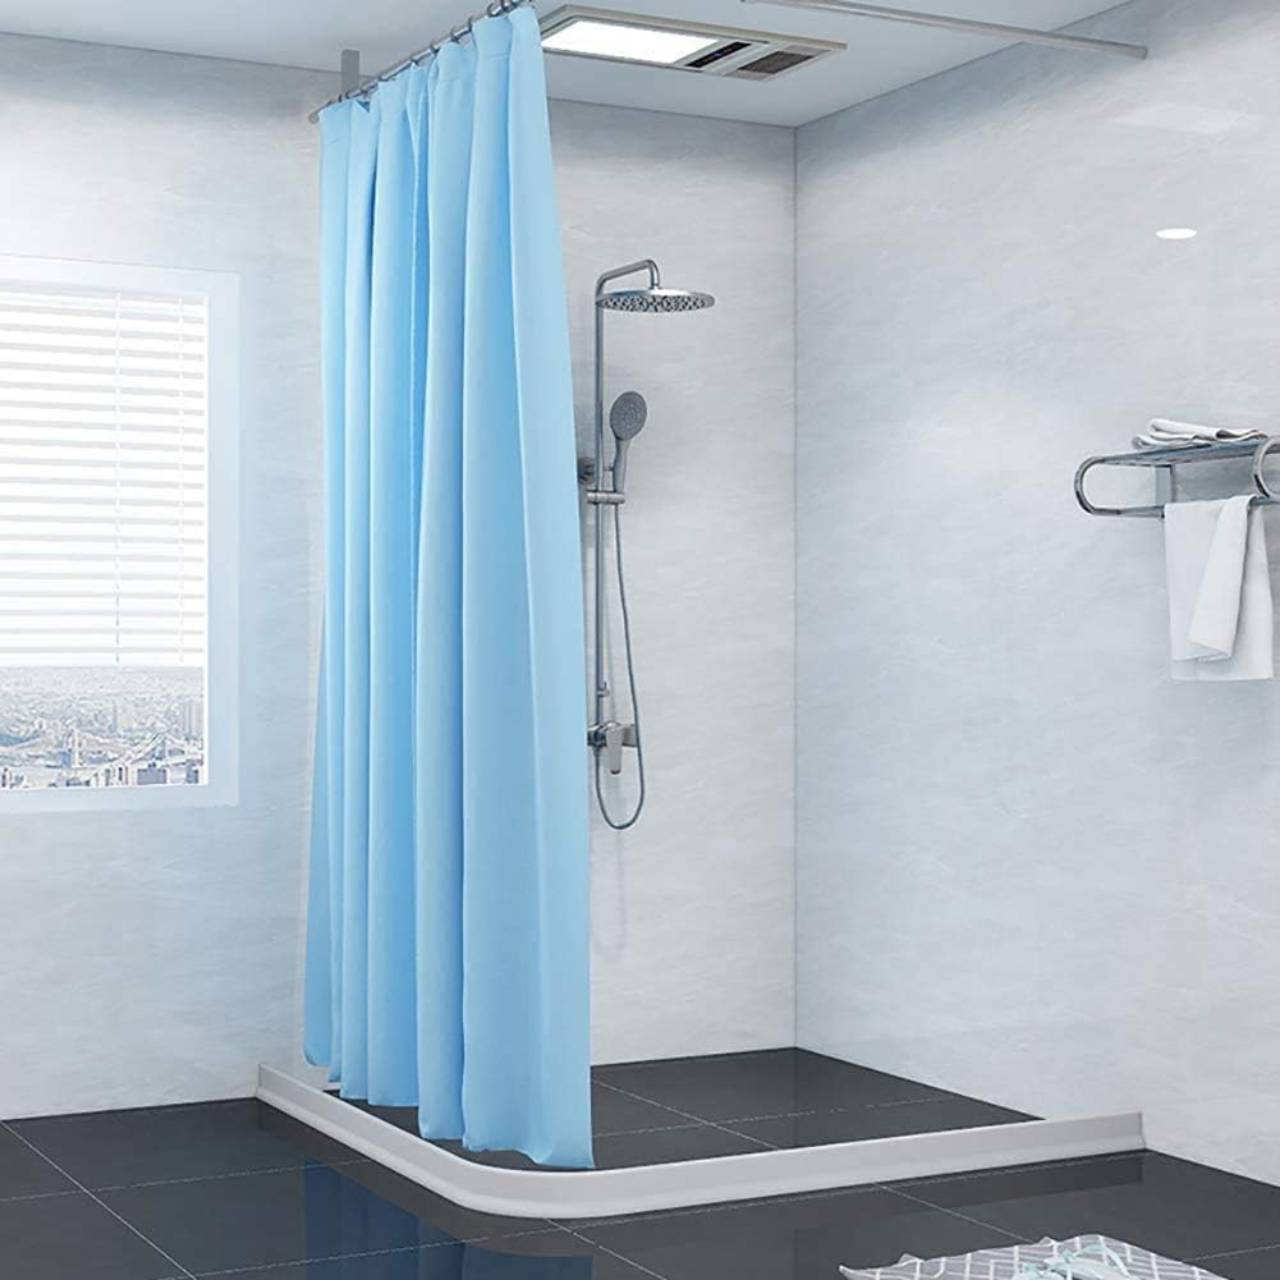 New Collapsible 67 Inch Shower Threshold Water Dam Collapsible Bath Shower  Barrier Water Stopper Retention System Dry and Wet Separation for Bathroom